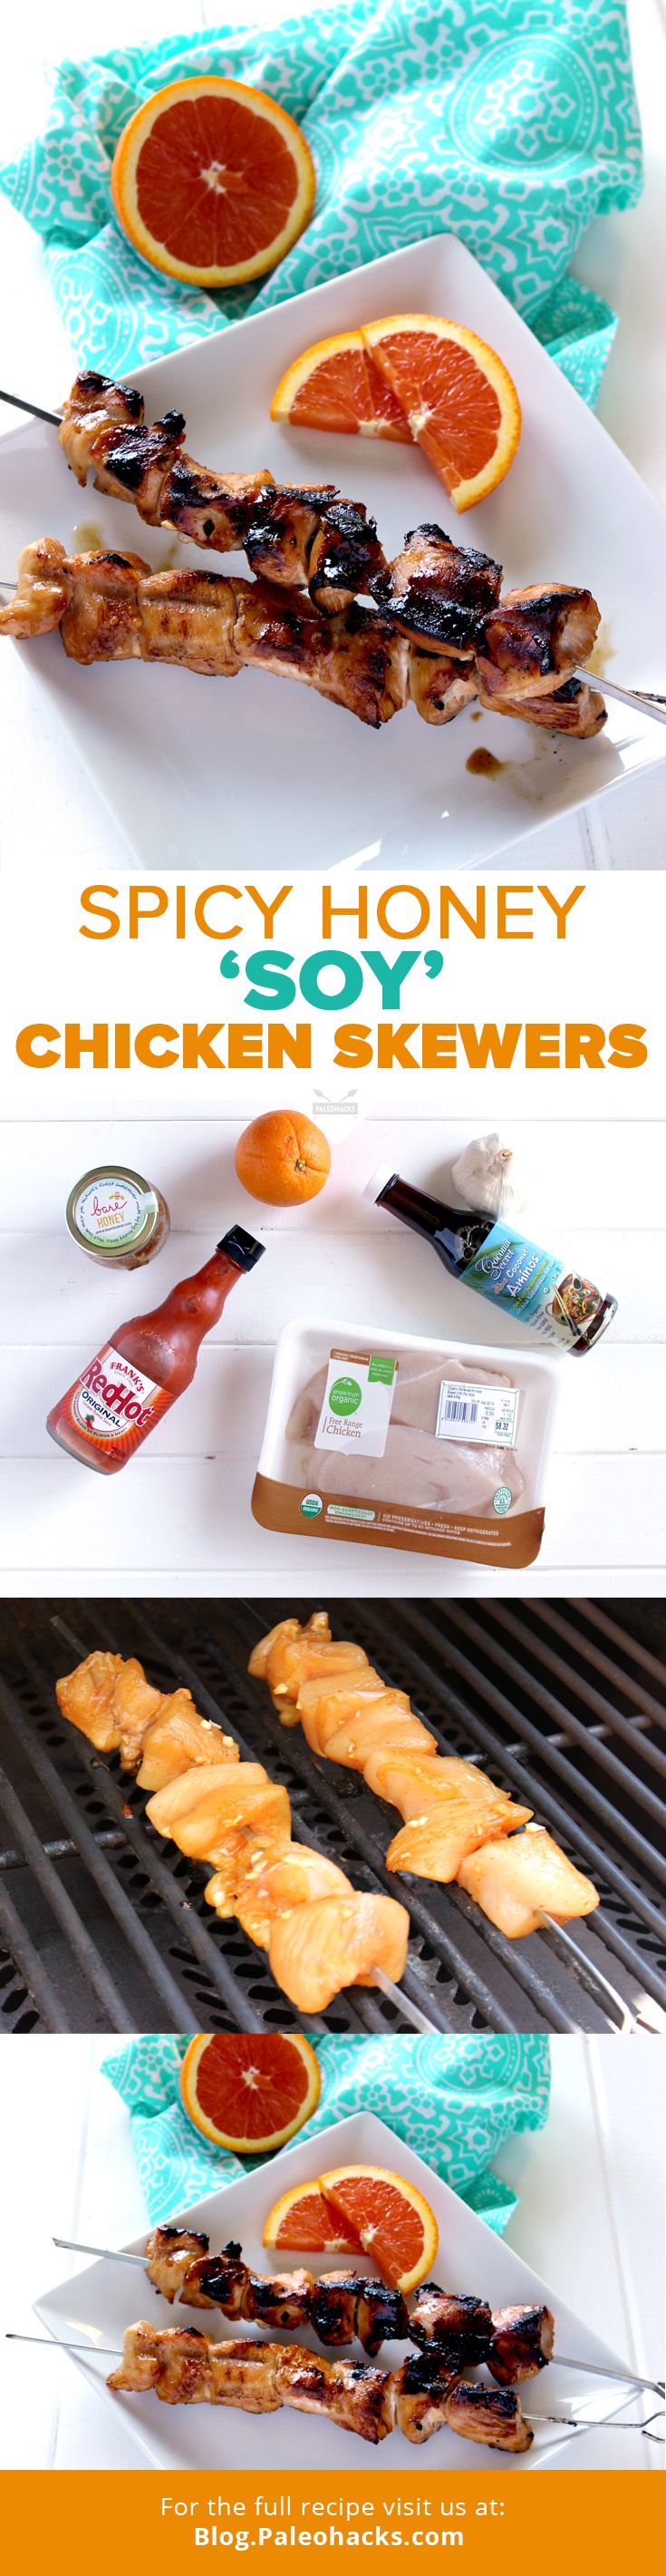 Looking for the flavor of a Chinese-inspired meal, but want something Paleo-friendly? These delicious Honey “Soy” marinated Chicken Skewers are the answer!